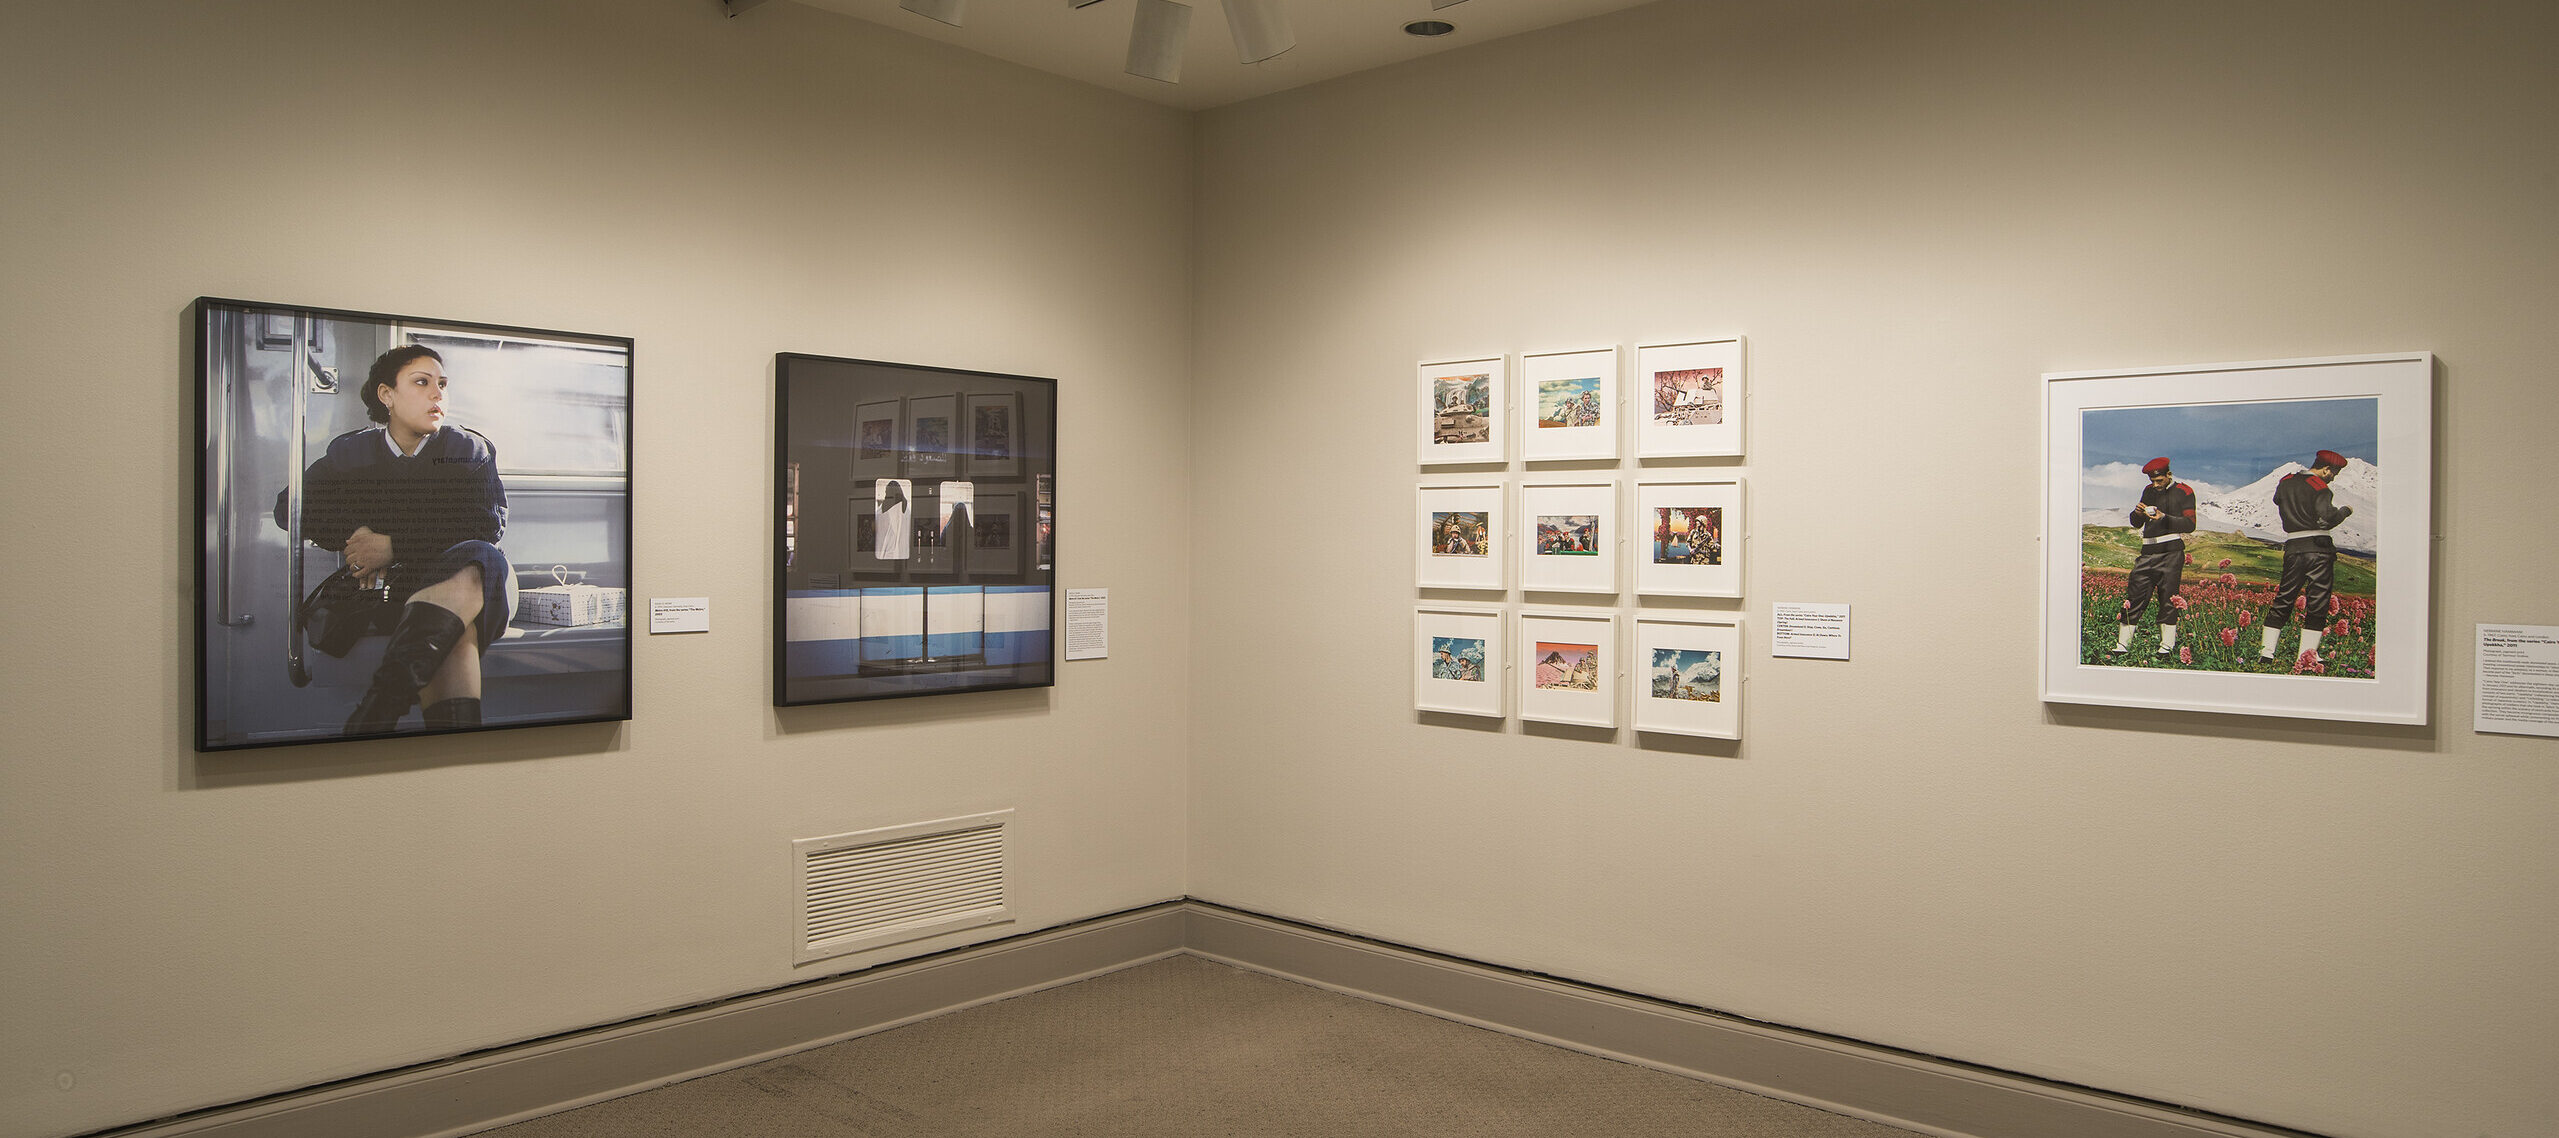 A view of a gallery space. Large prints of photographs are hanging on each wall, depicting a woman in a train and two men in an alpine scene.